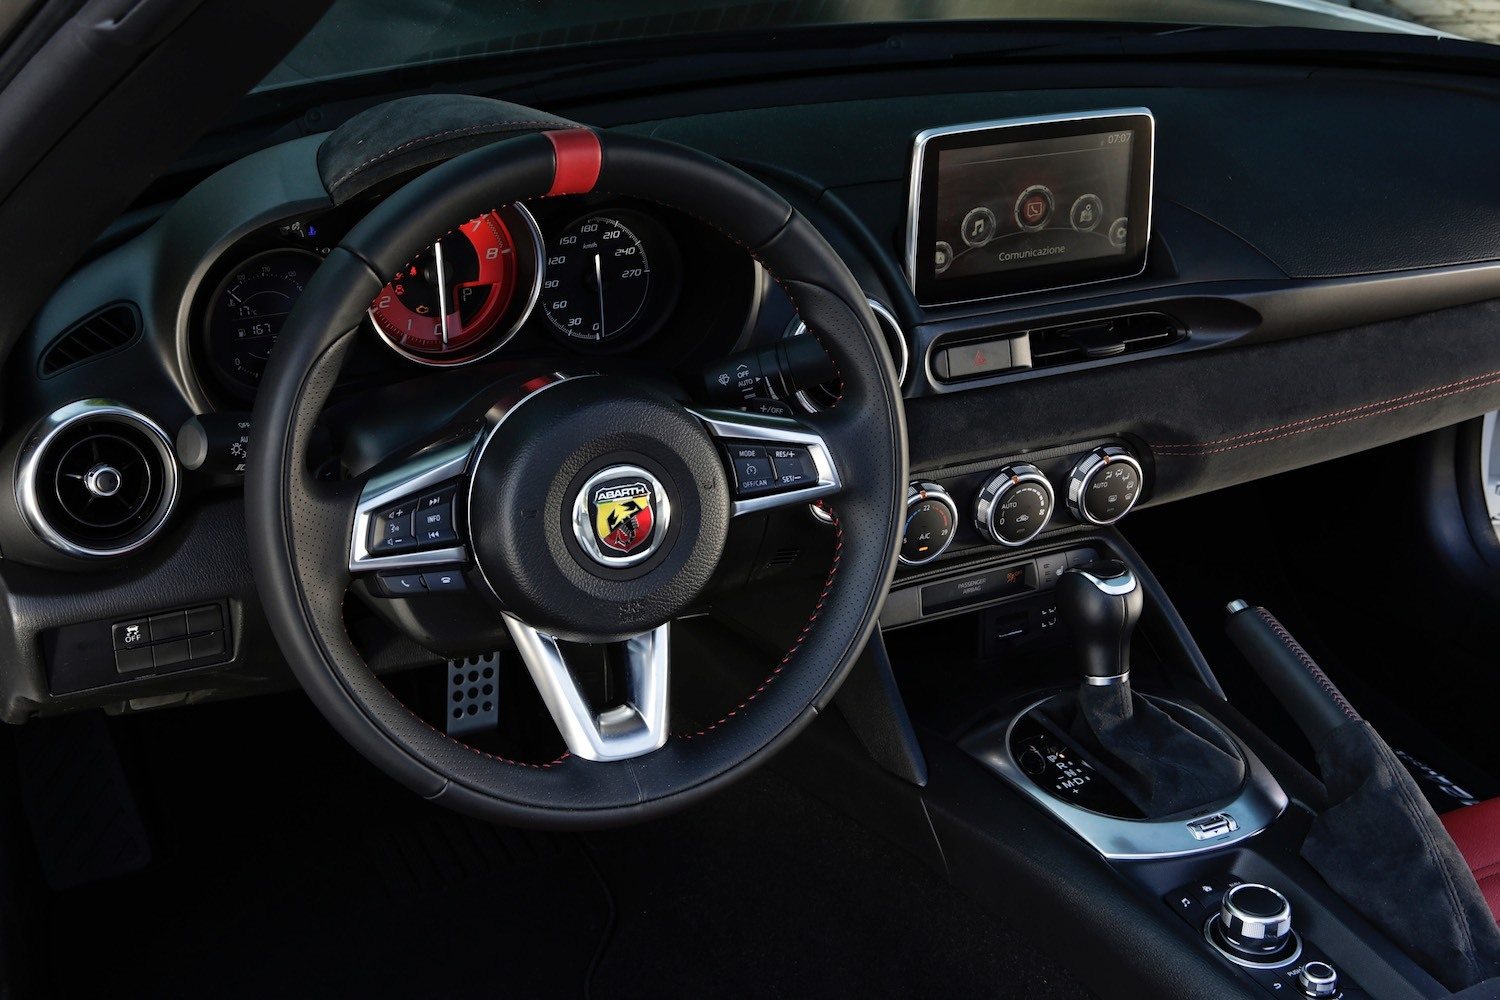 Jonathan Humphrey reviews the Abarth 124 Spider for Drive 19